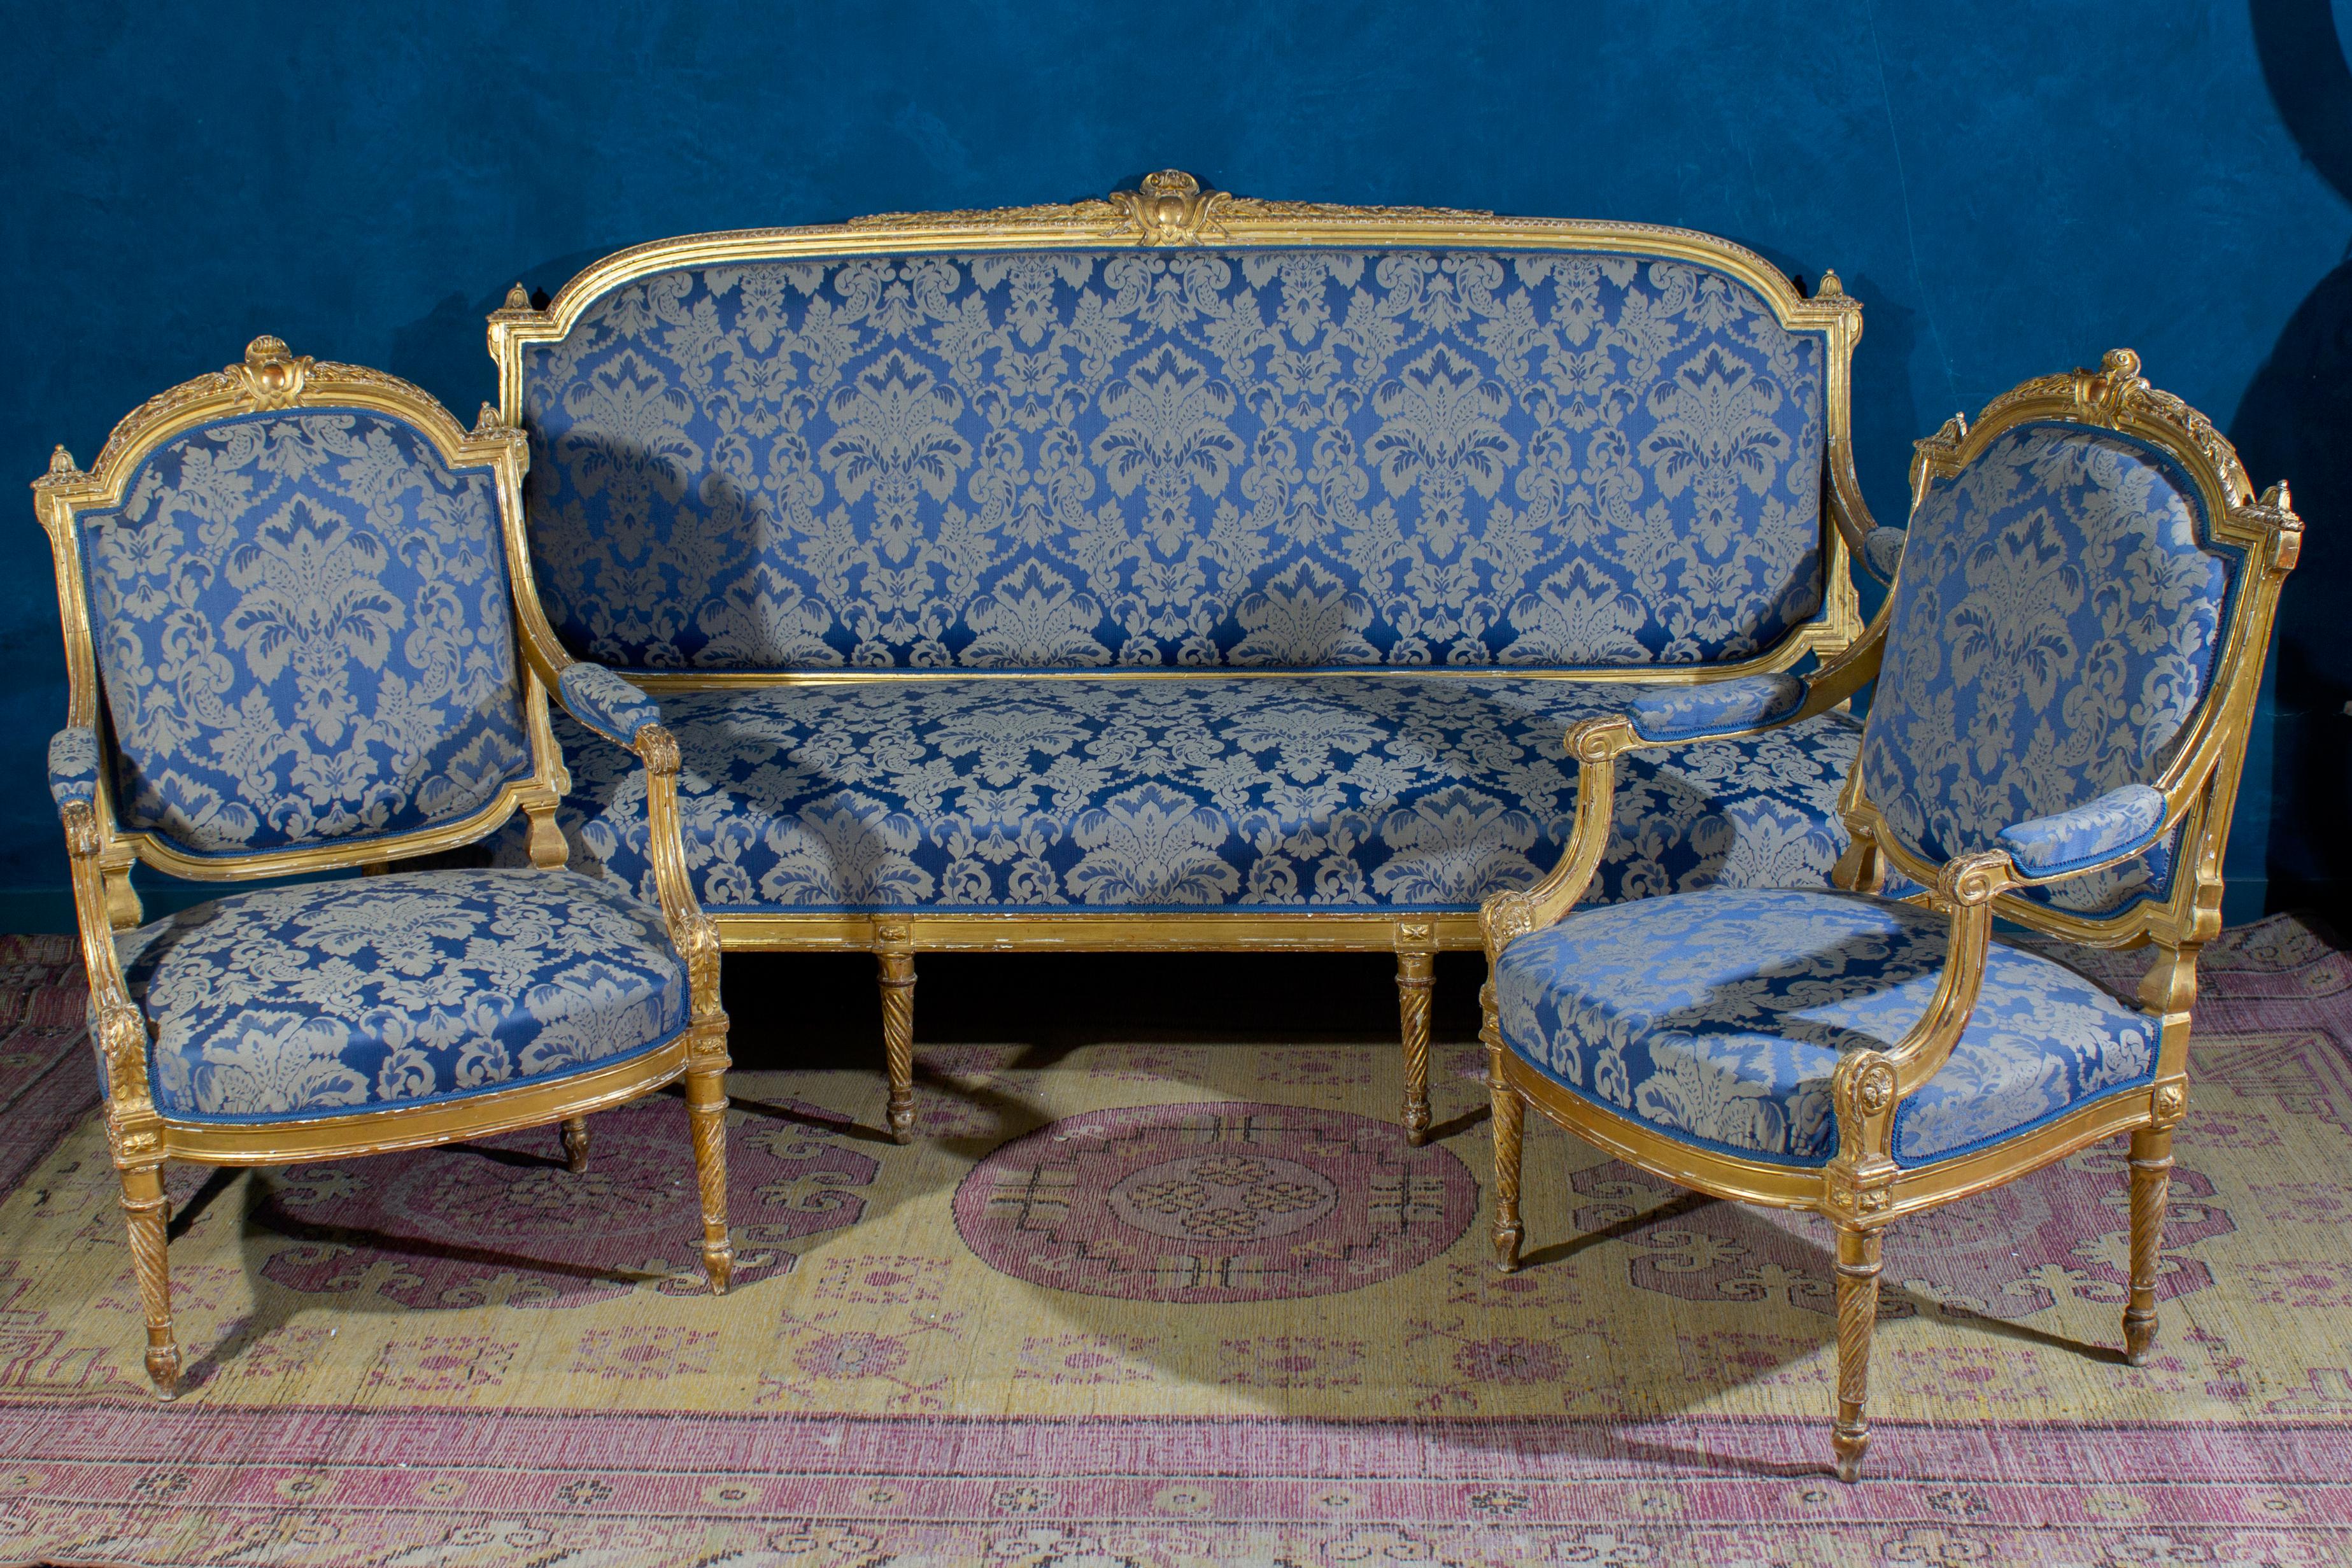 Louis XVI Elegant French 19' Century Gilt Living Room Suite with a Sofa and Four Armchairs For Sale